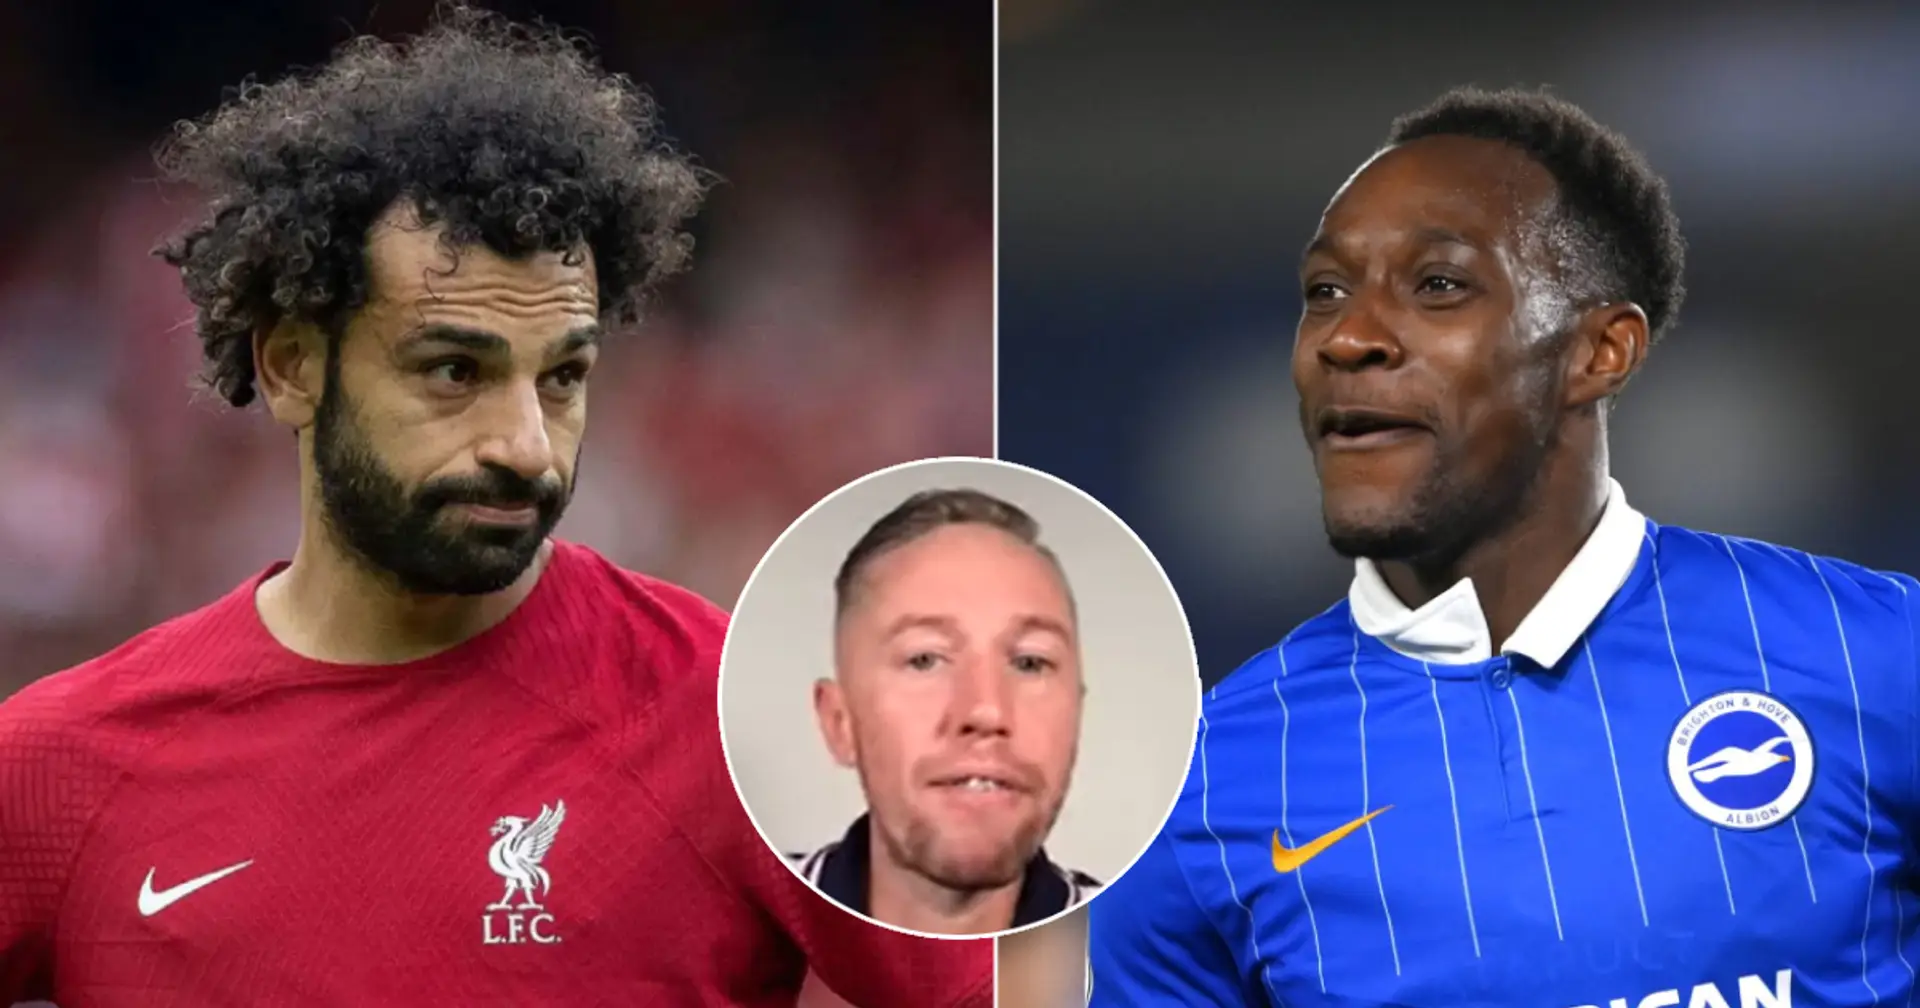 Arsenal fan brazenly claims Danny Welbeck is 'better overall footballer' than Salah, gets roasted on social media